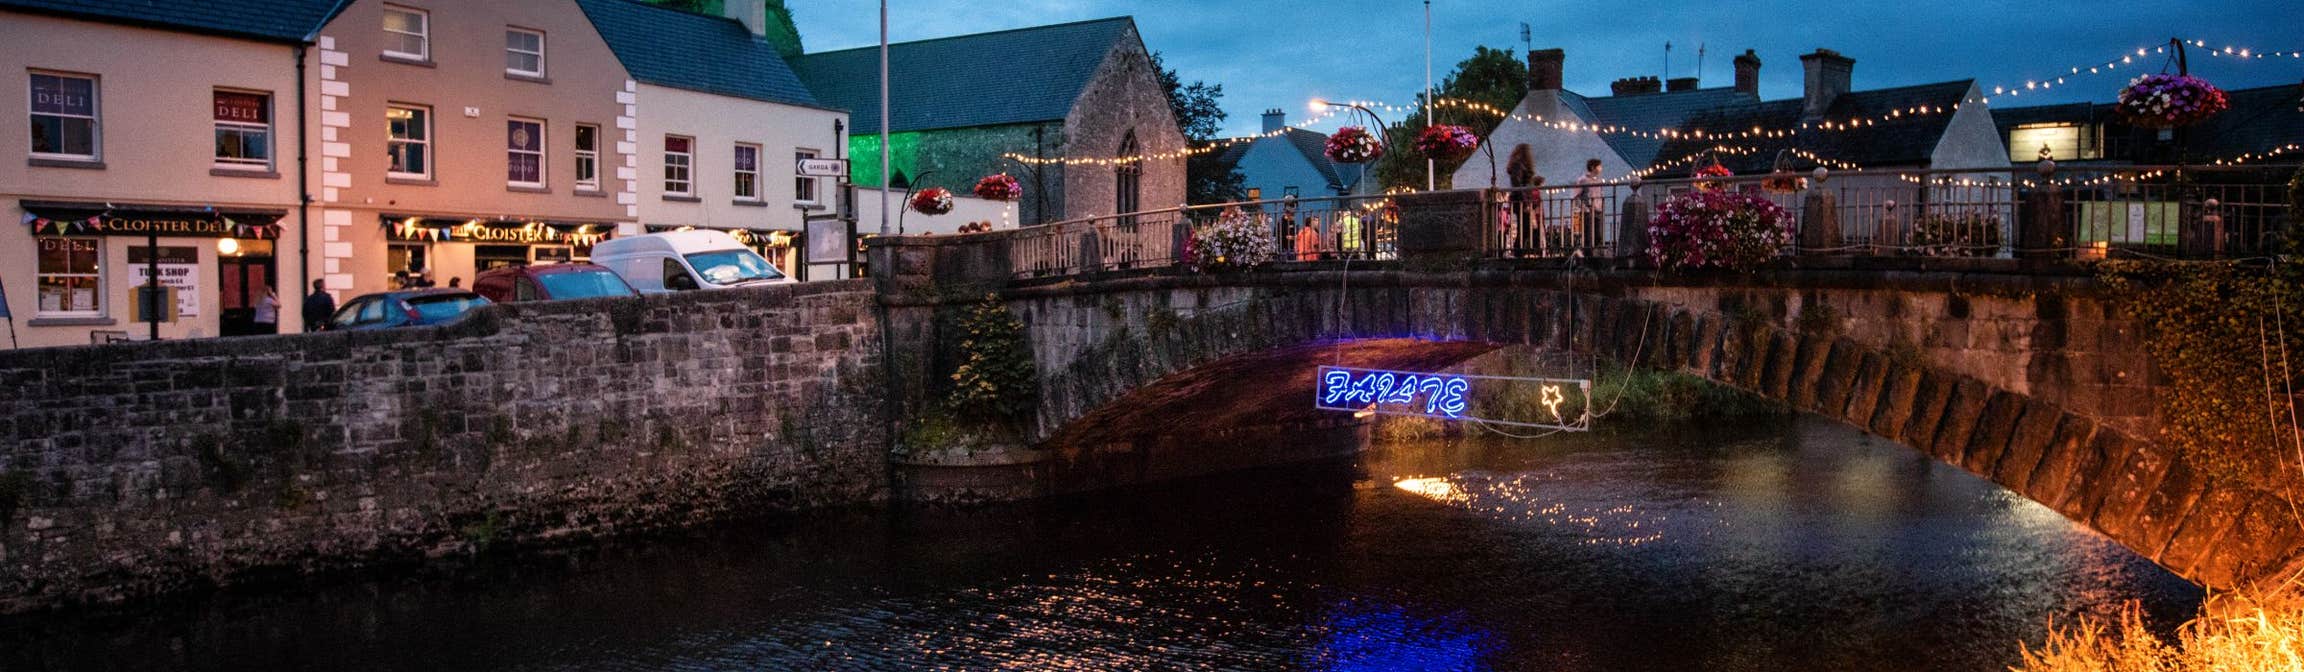 Image of Ennis, County Clare, by night